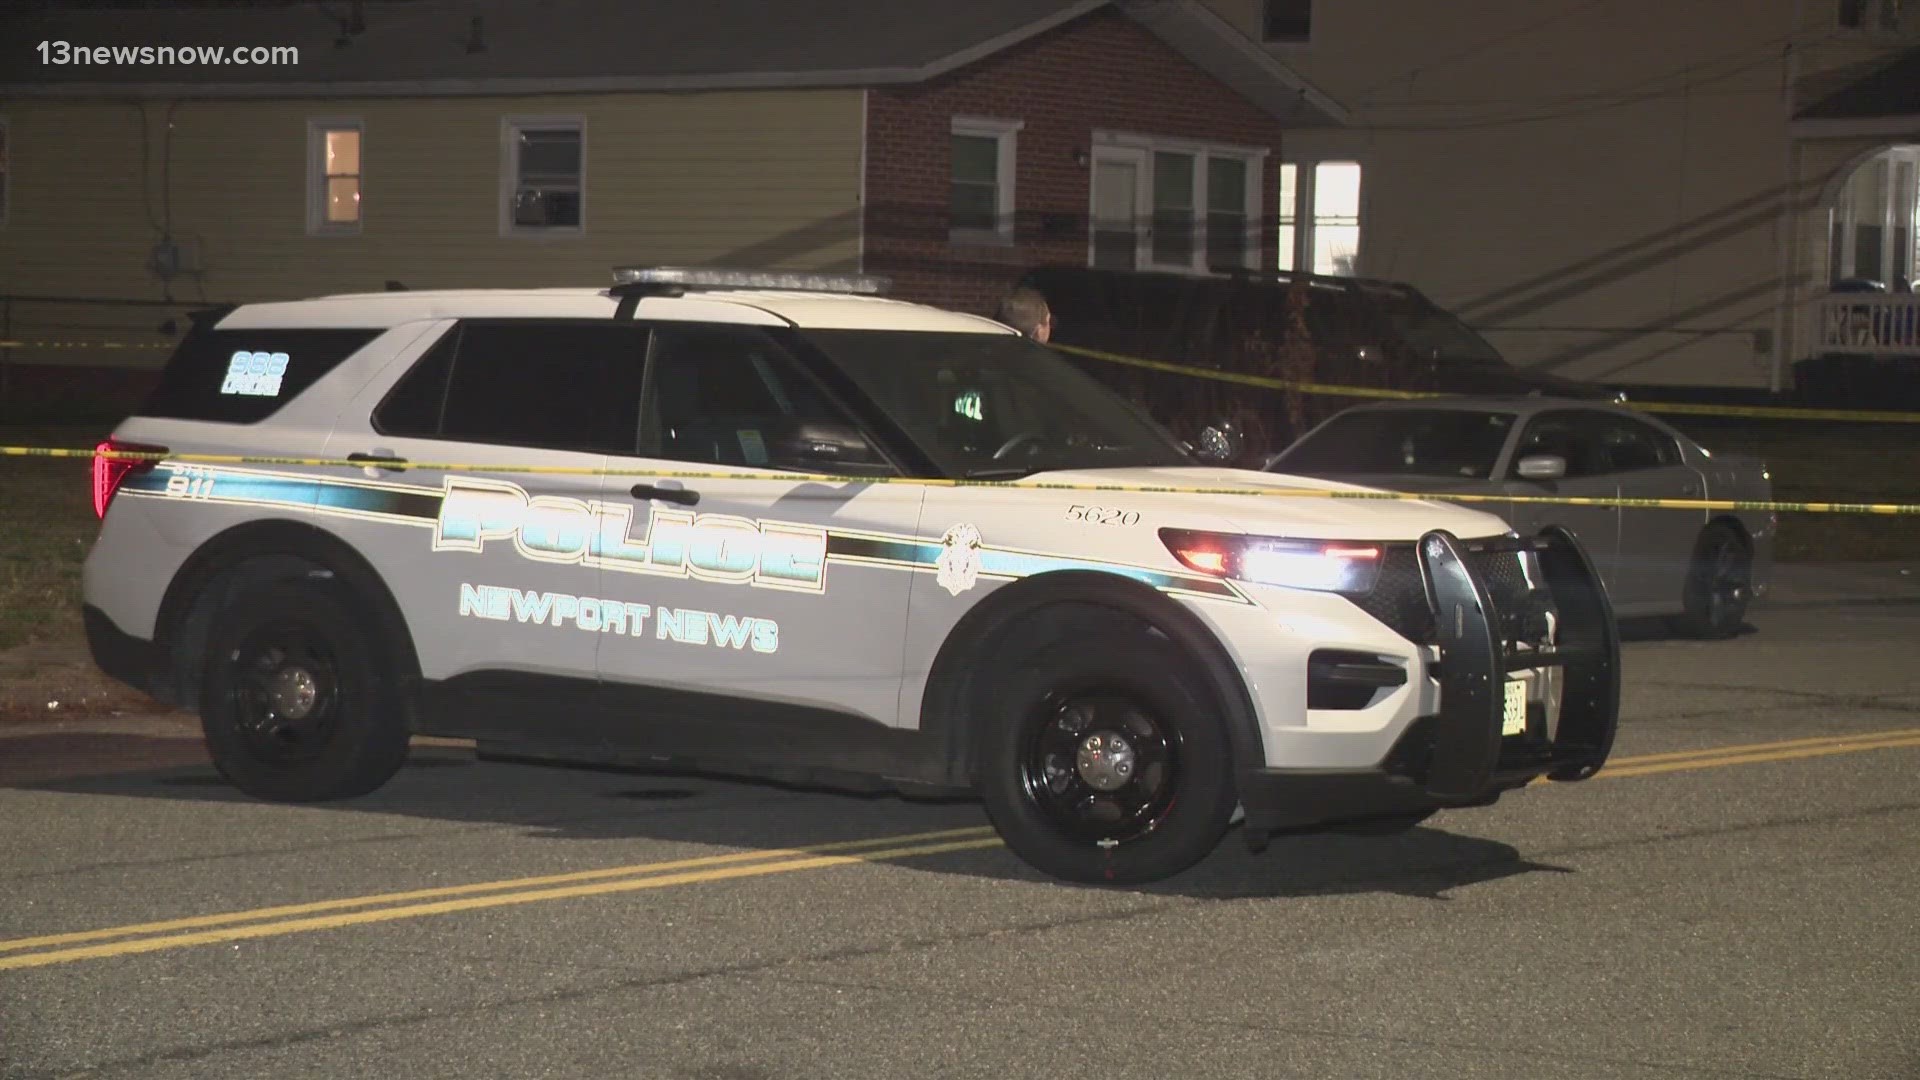 The victim was identified as 38-year-old Jave Irvin Edwards of Newport News.